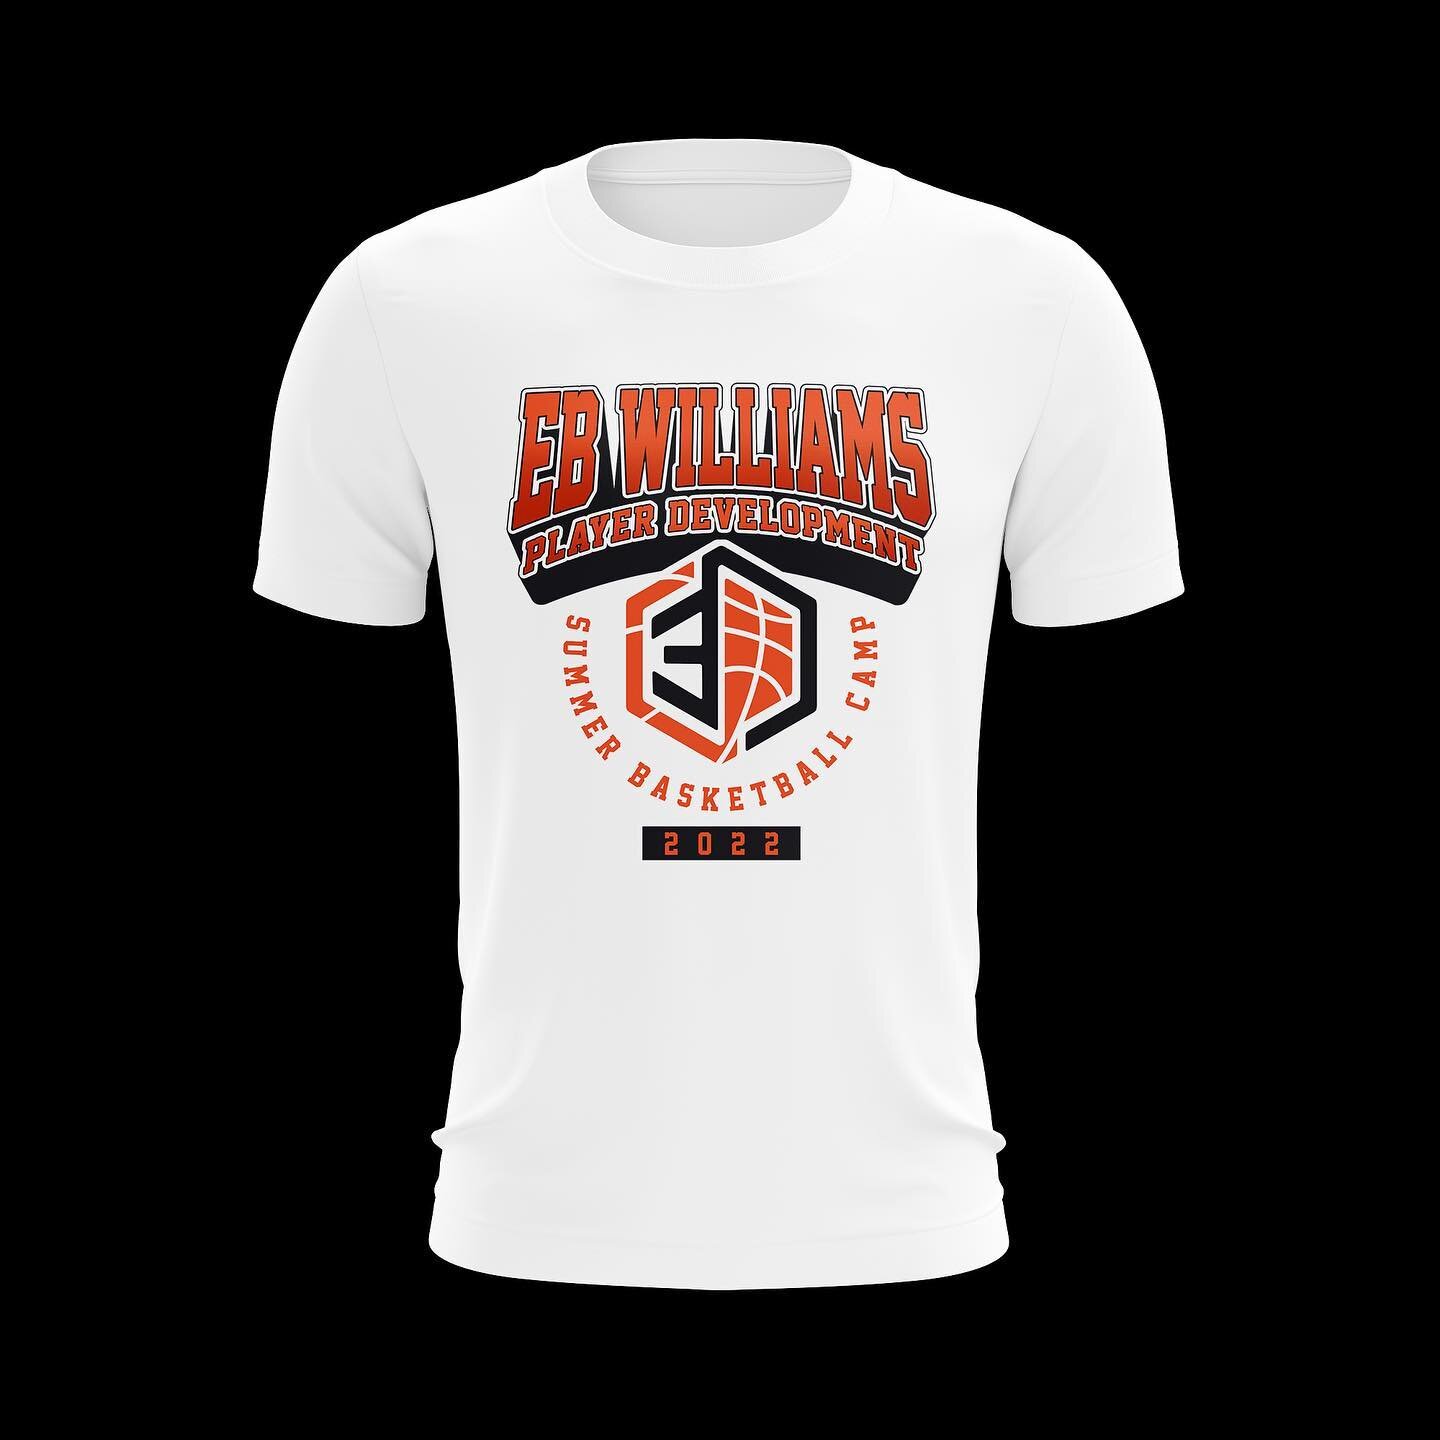 SUMMER CAMP T-SHIRT🔥

Included for ALL of our campers and MORE!

We still have a few spots left for each camp about a month away. Hit the link in our bio.

GIRLS ONLY: July 11th - 14th
BOYS ONLY: July 25th - 28th
COED: August 1st - 5th (M-F)